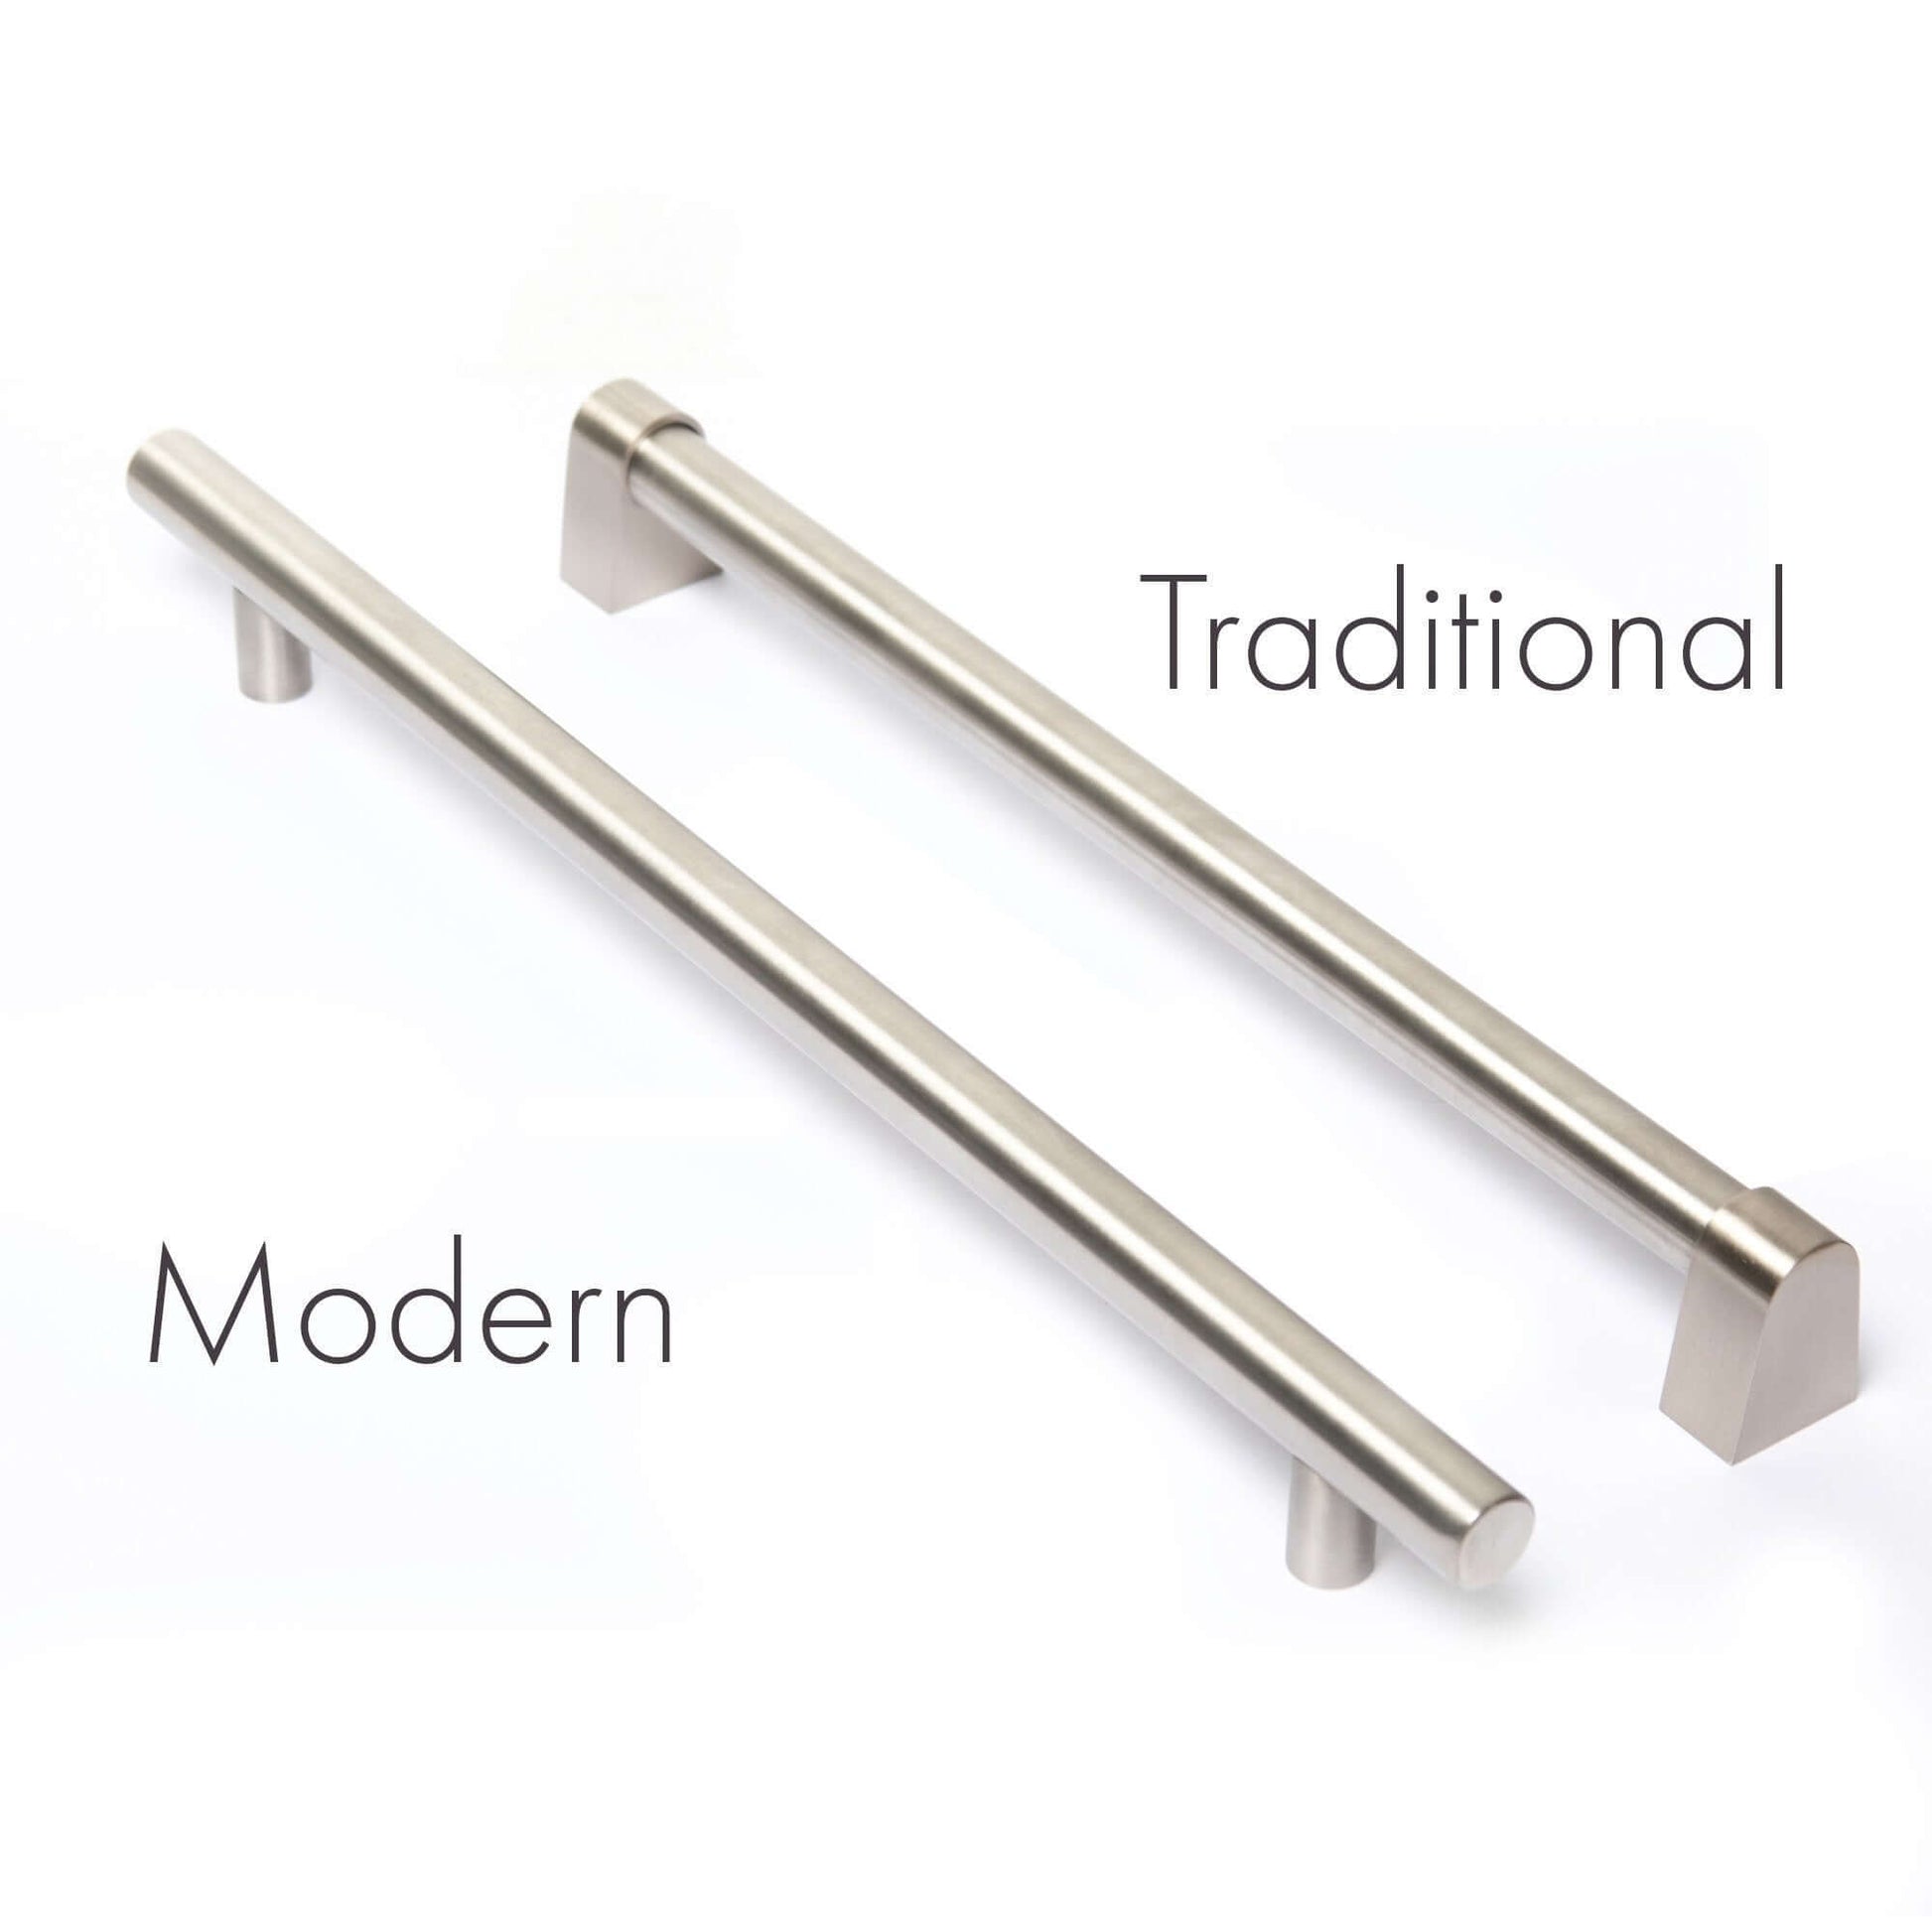 Traditional Dishwasher Handle and Modern Dishwasher Handle Compared